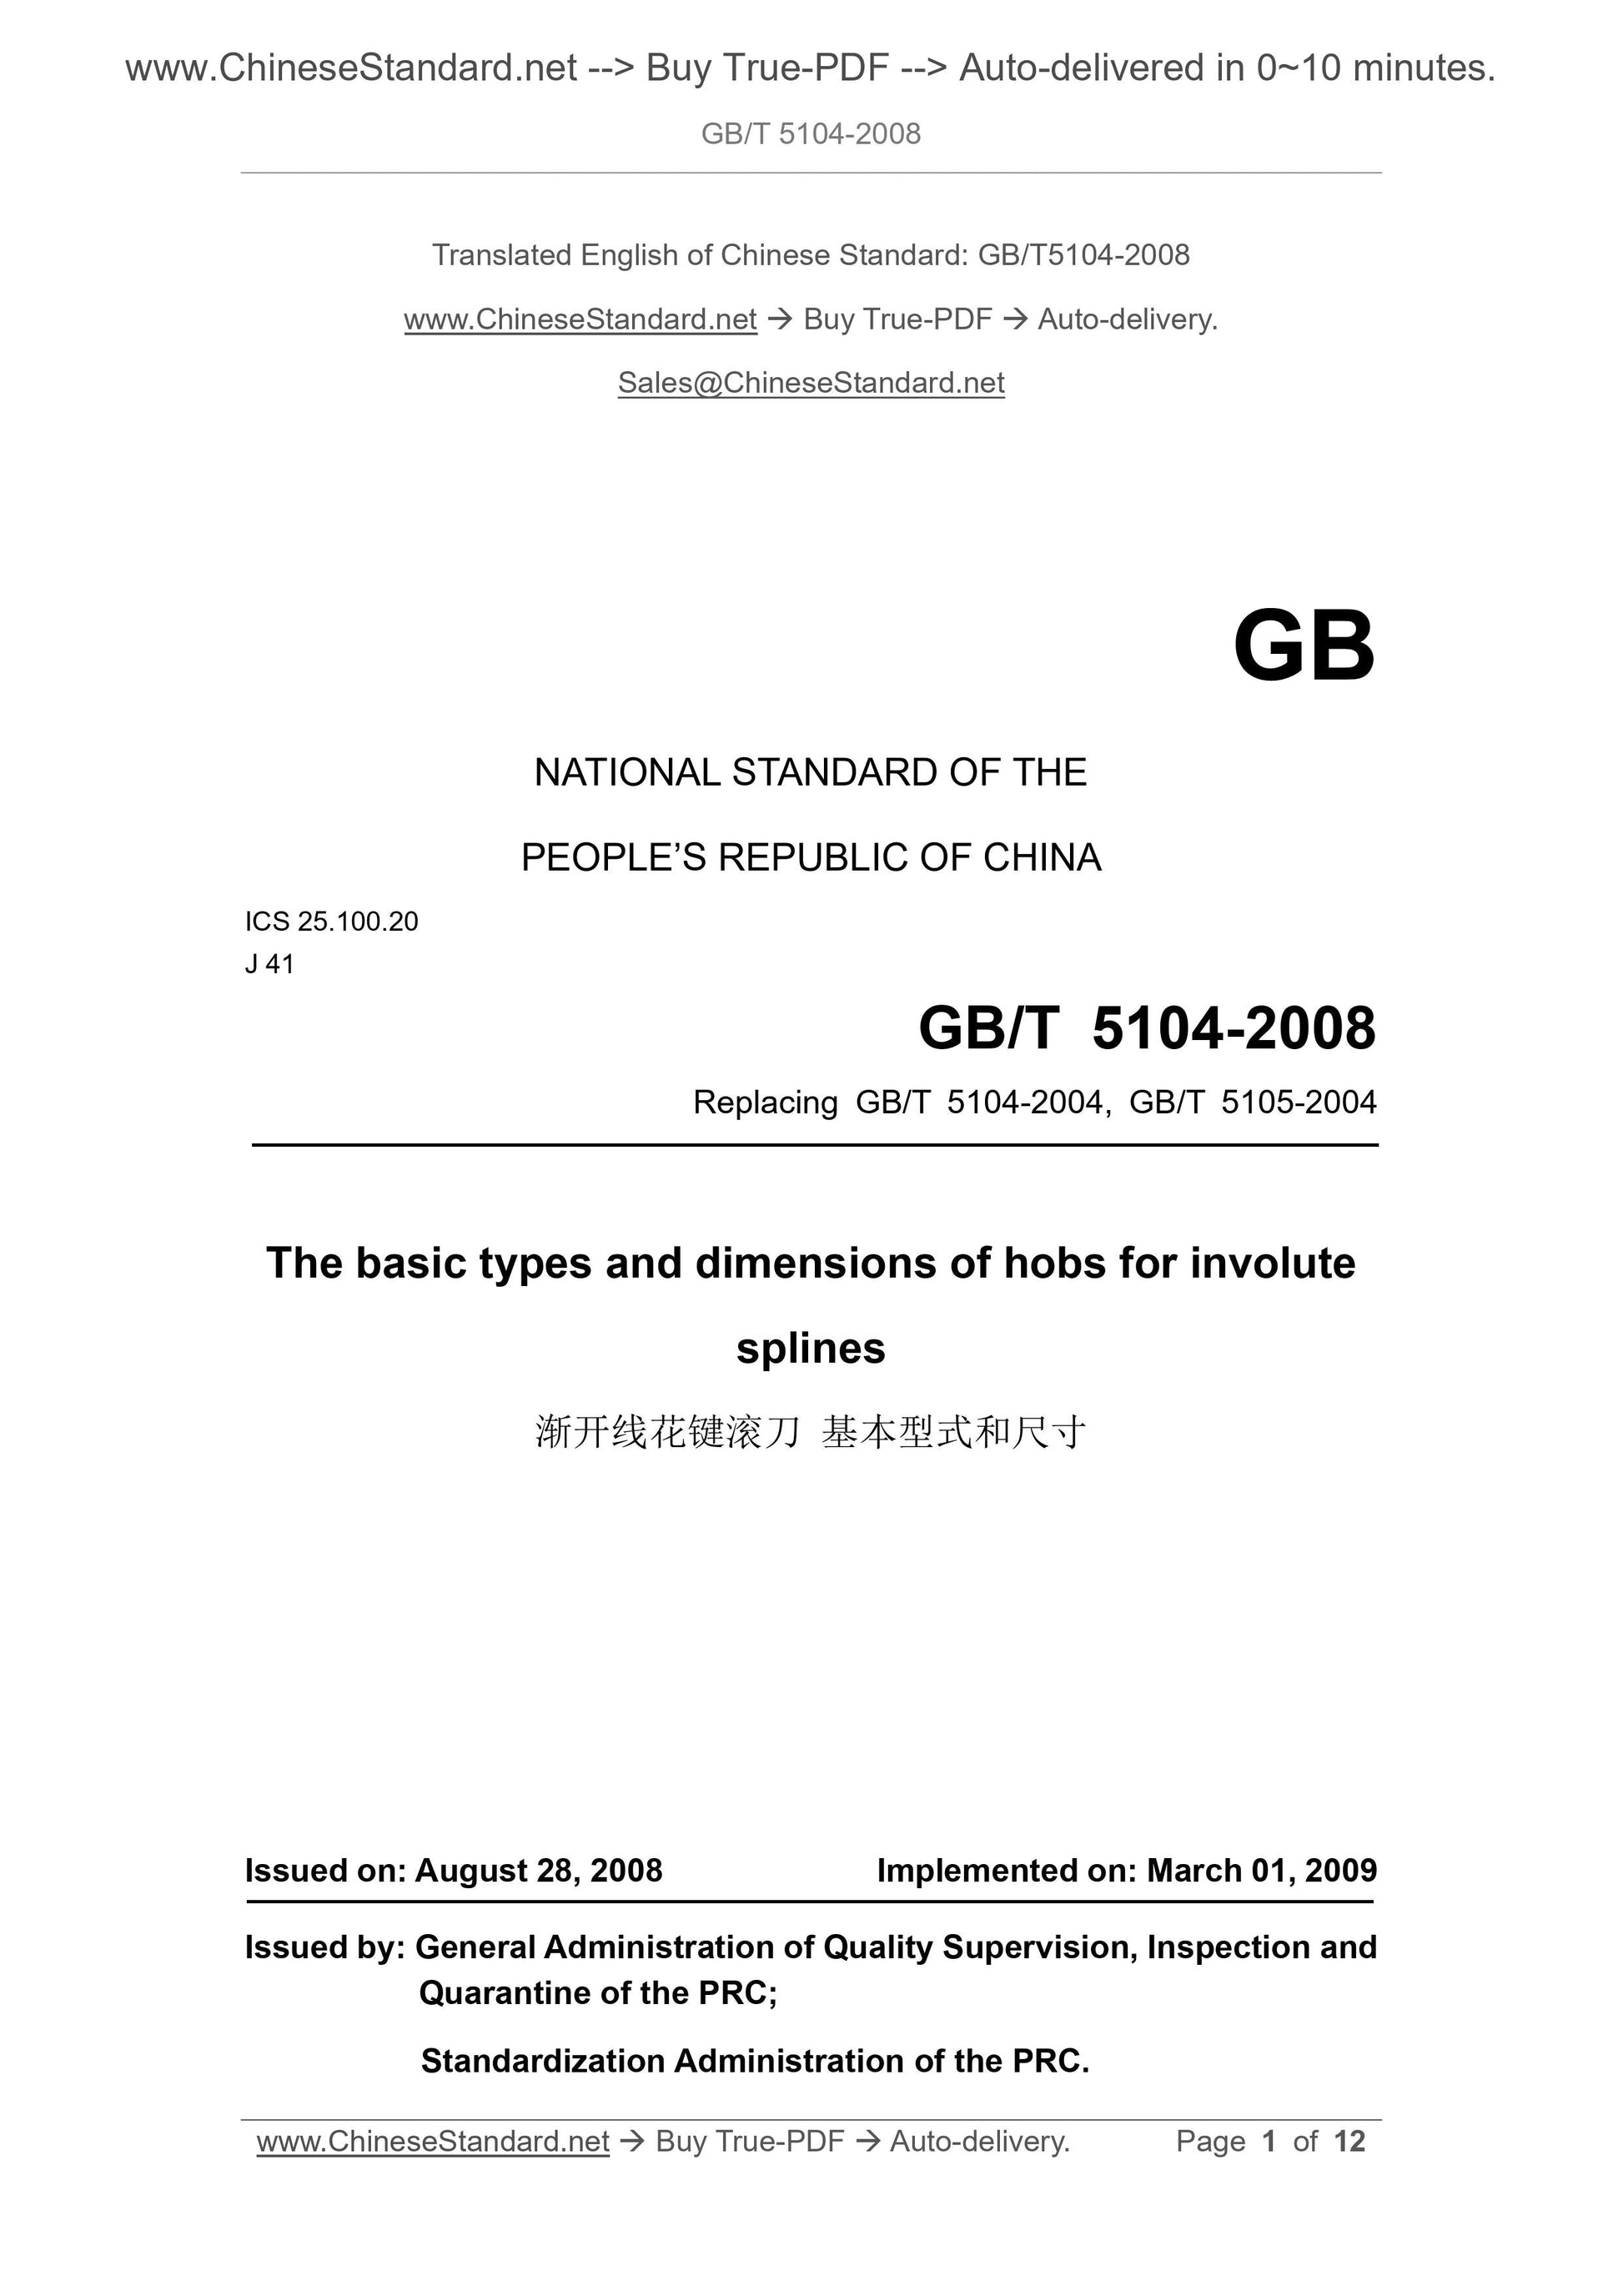 GB/T 5104-2008 Page 1